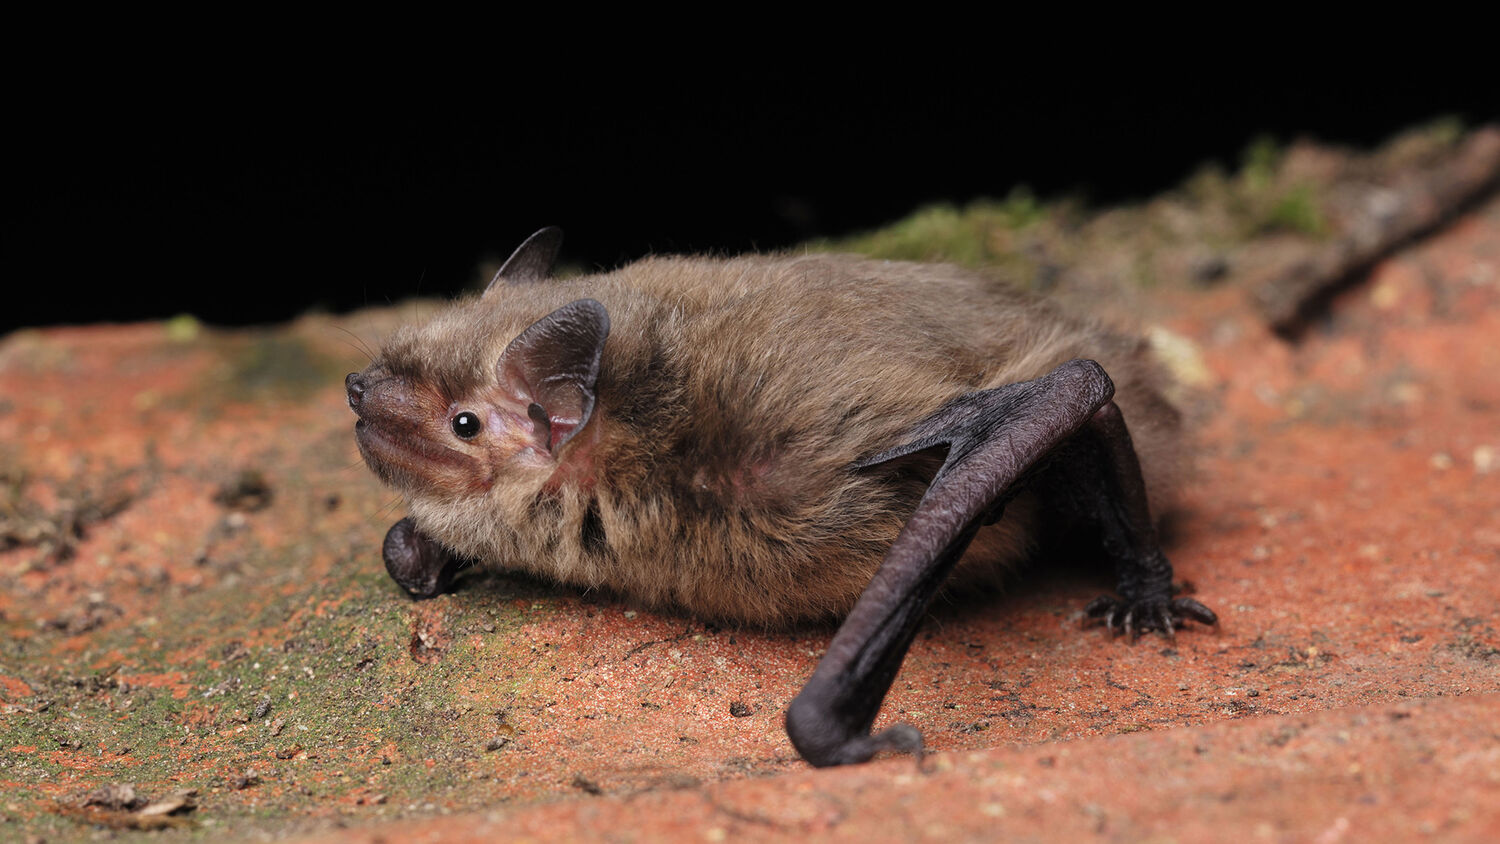 A pipistrelle bat rests on a brick surface, its wings tucked into its furry body.